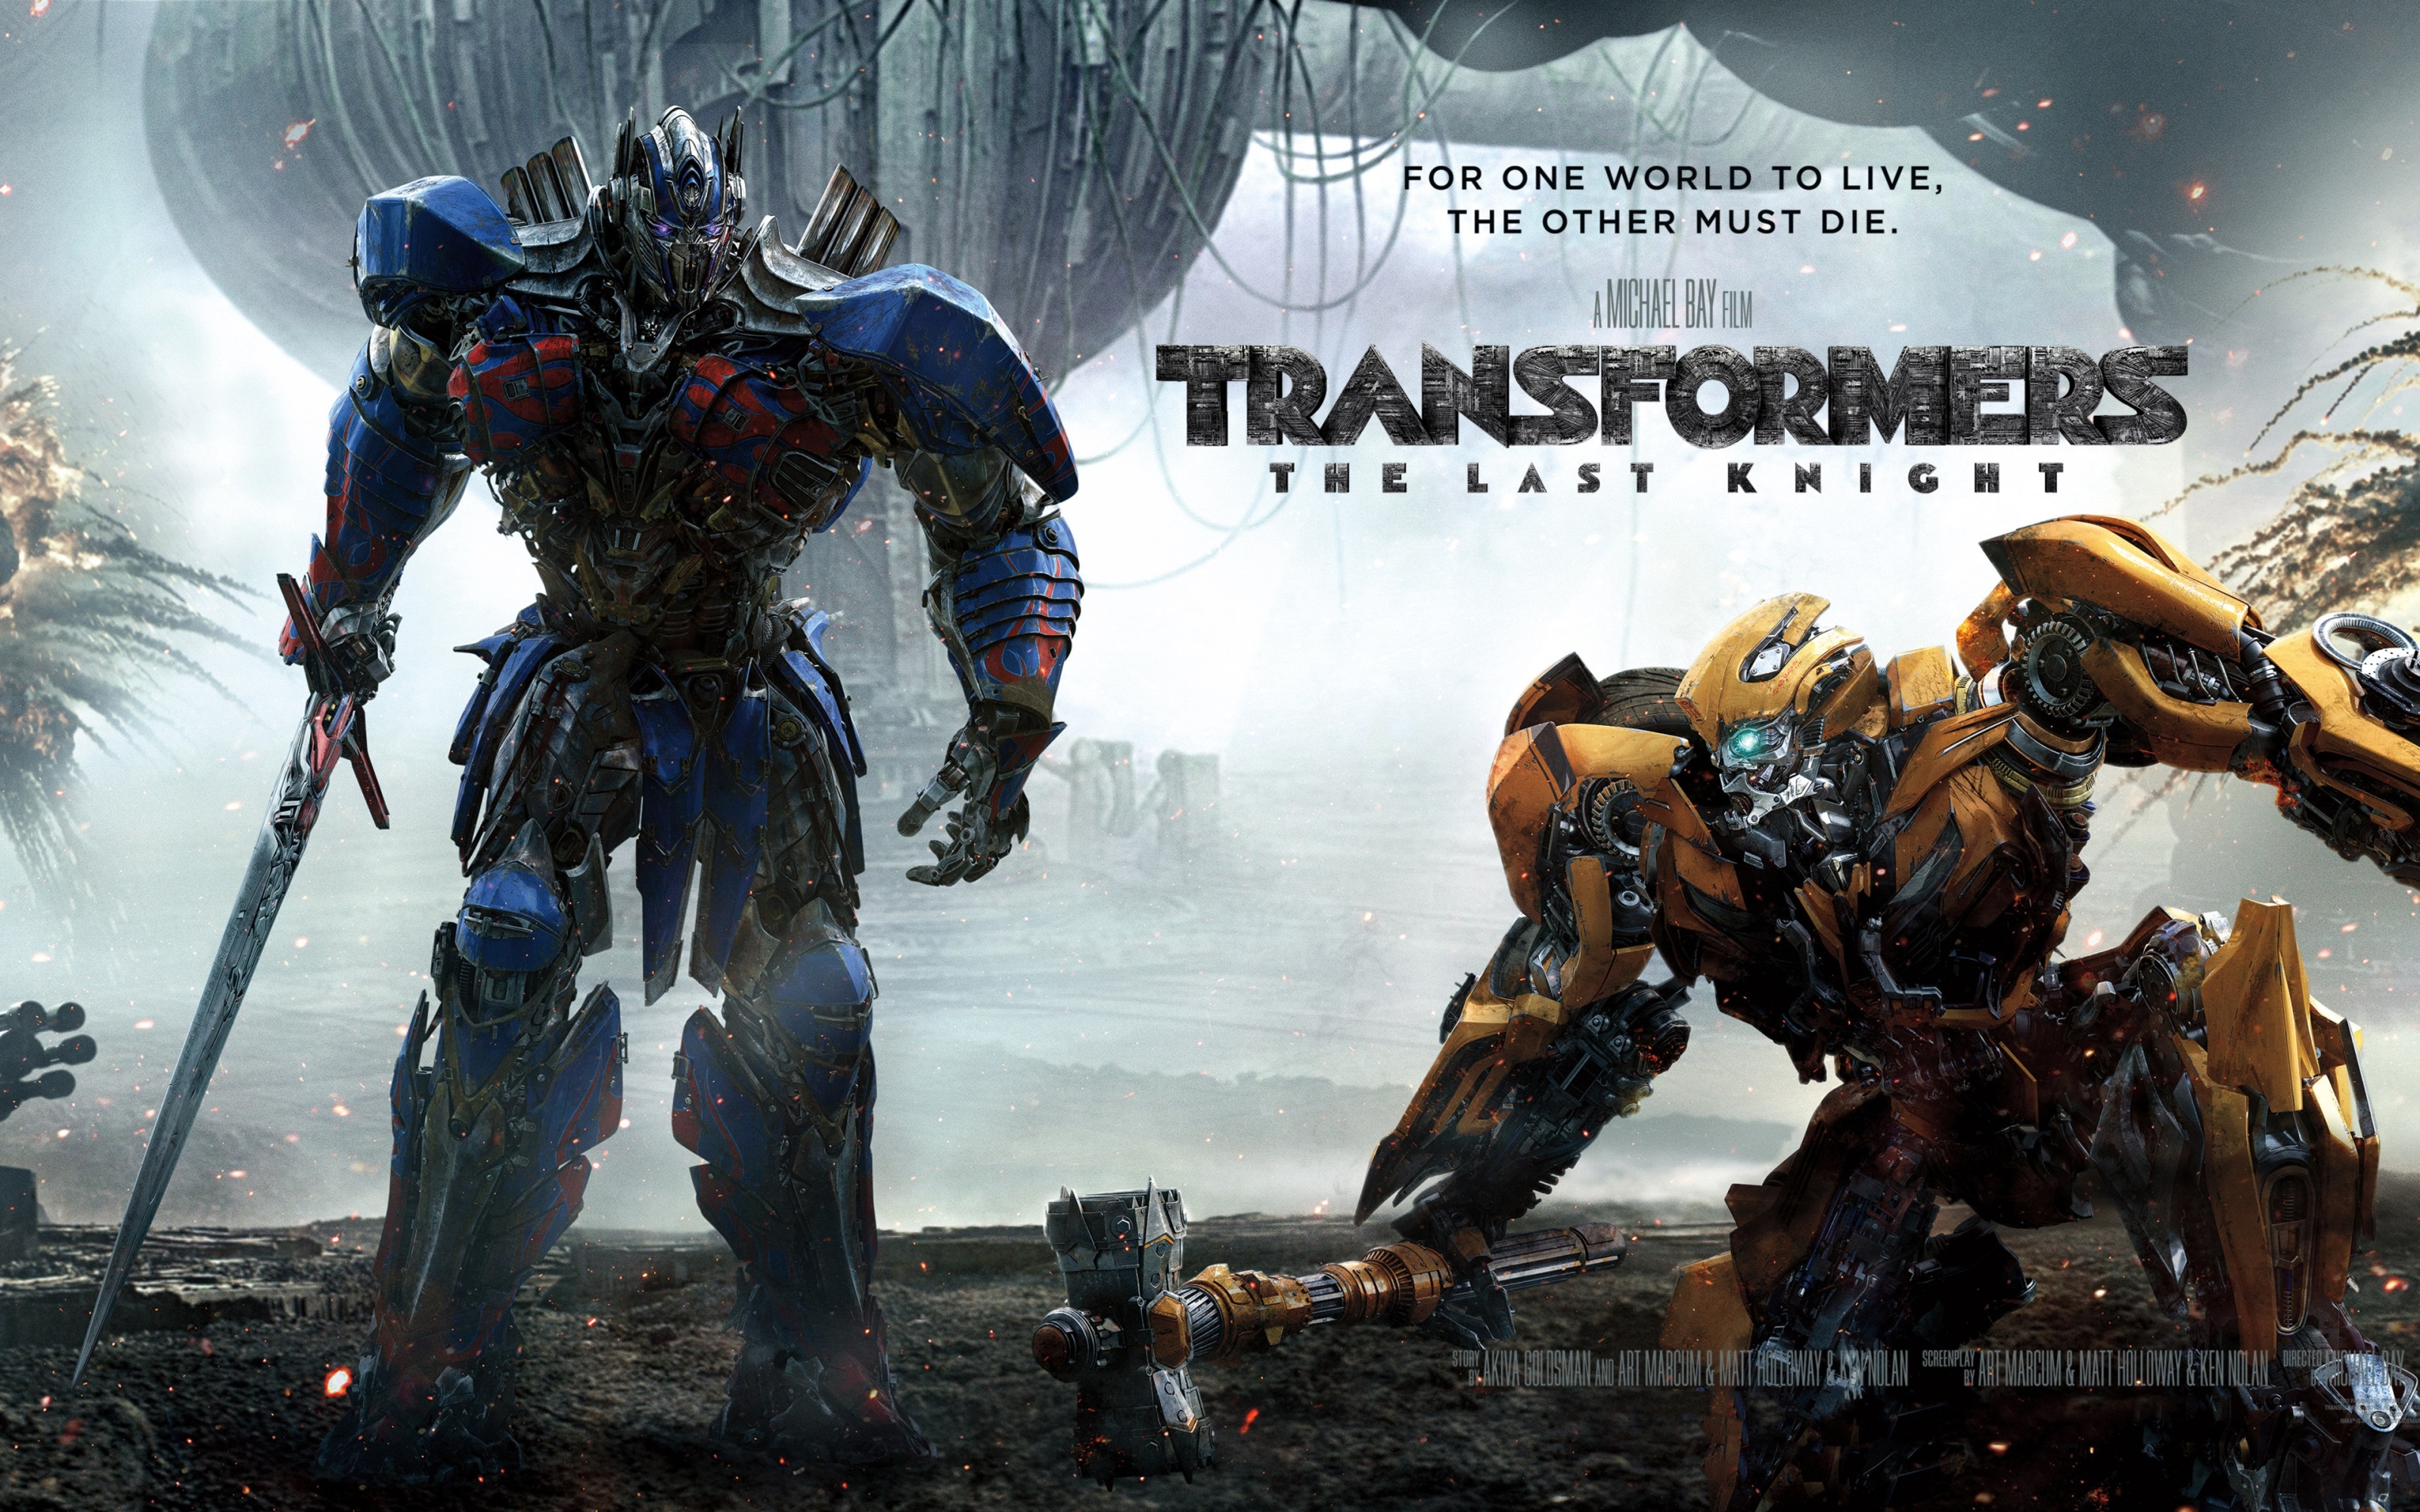 Transformers The Last Knight 2017 for 3200 x 2000 Wide Retina Display resolution